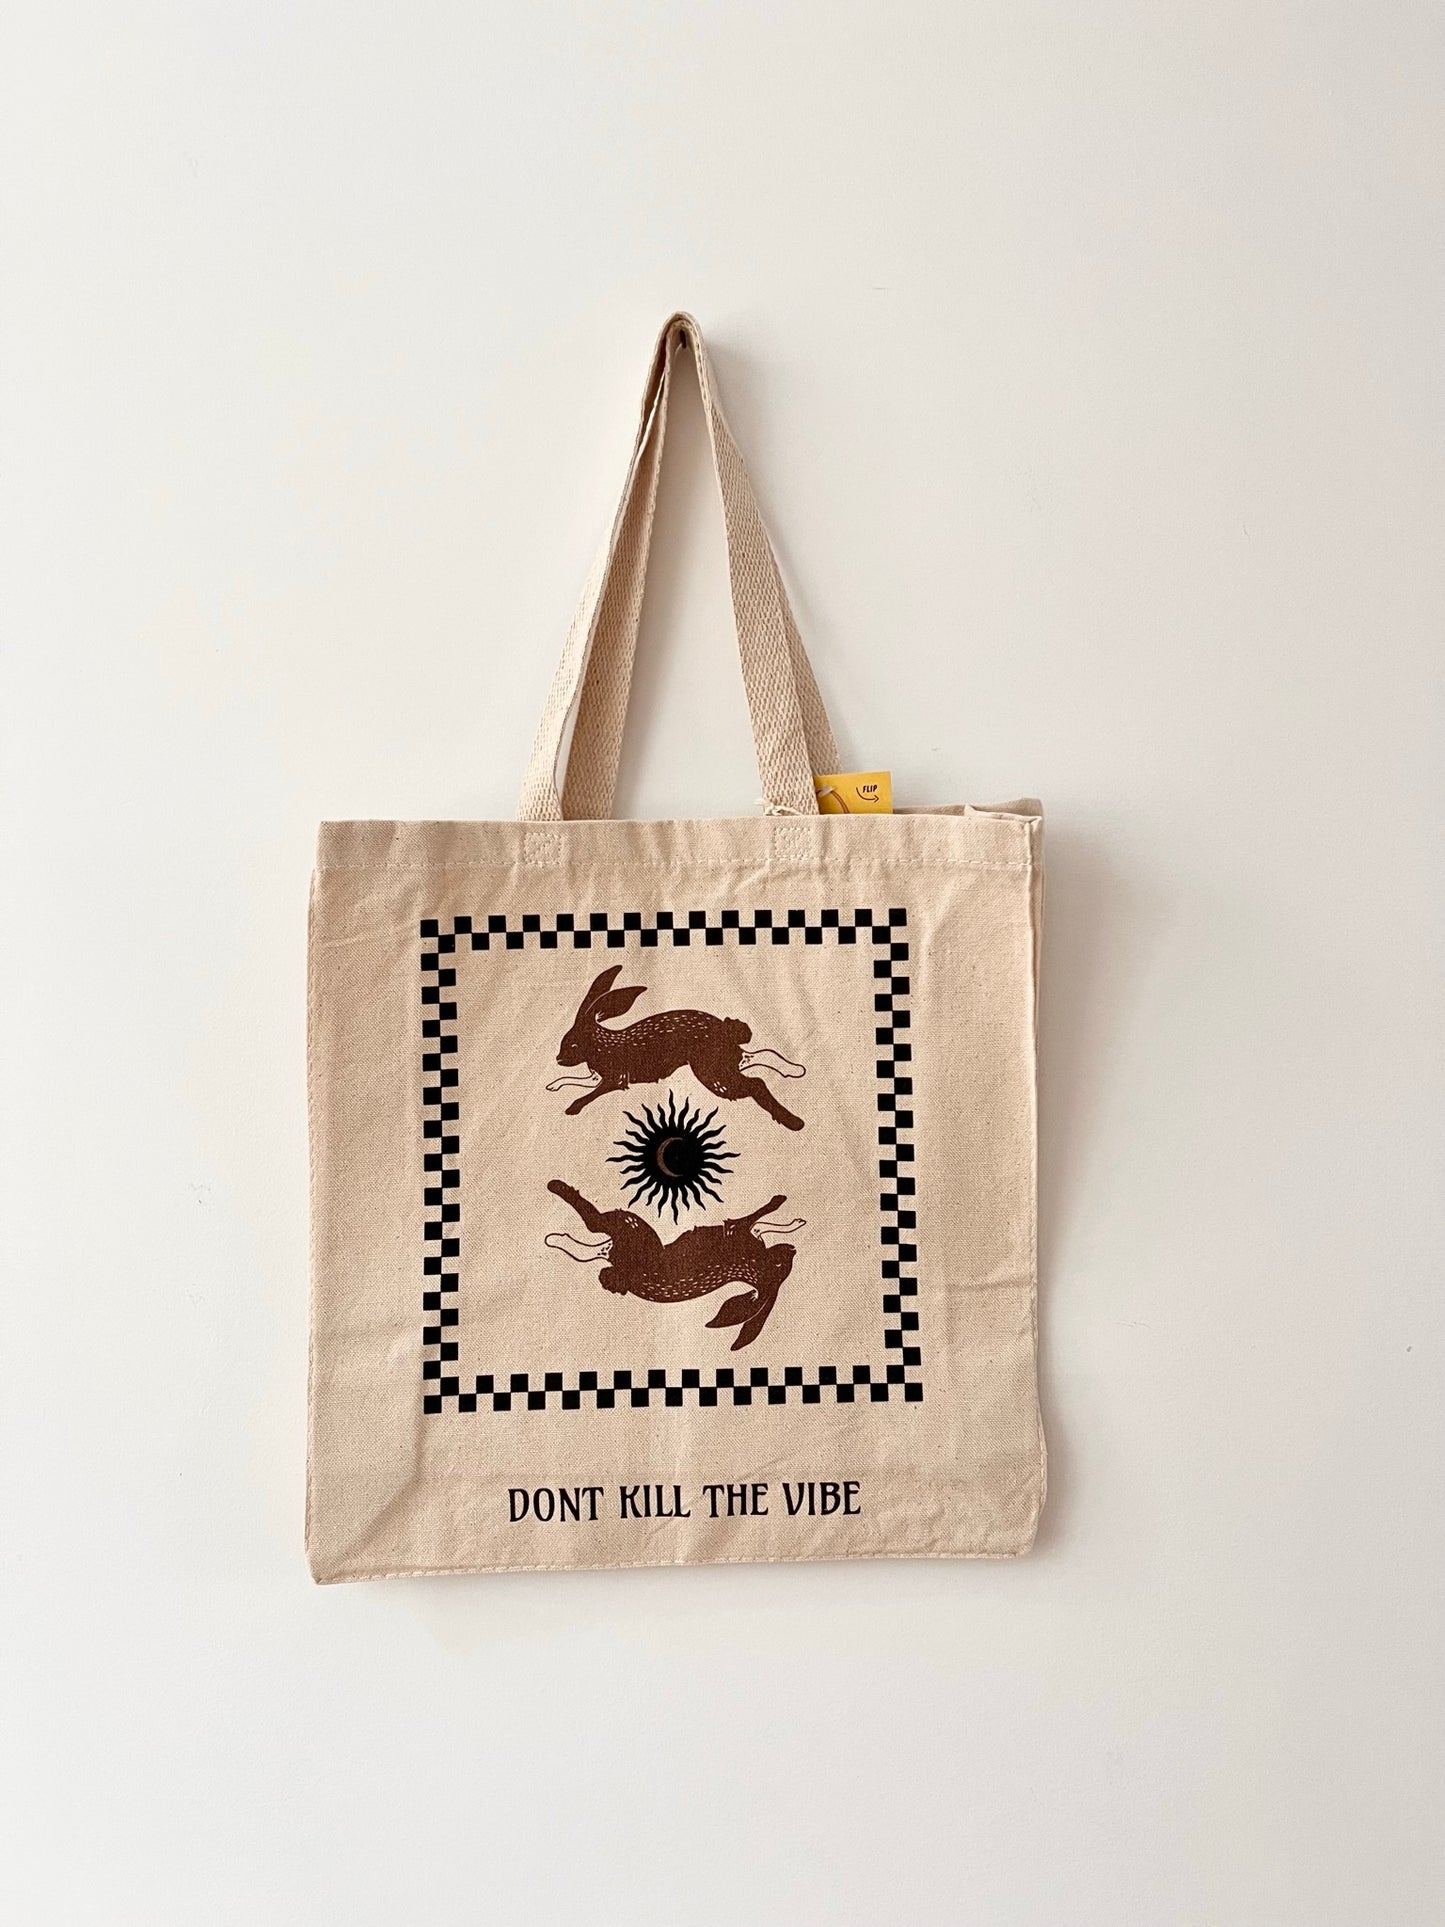 Meaghan Lovis screen printed totes